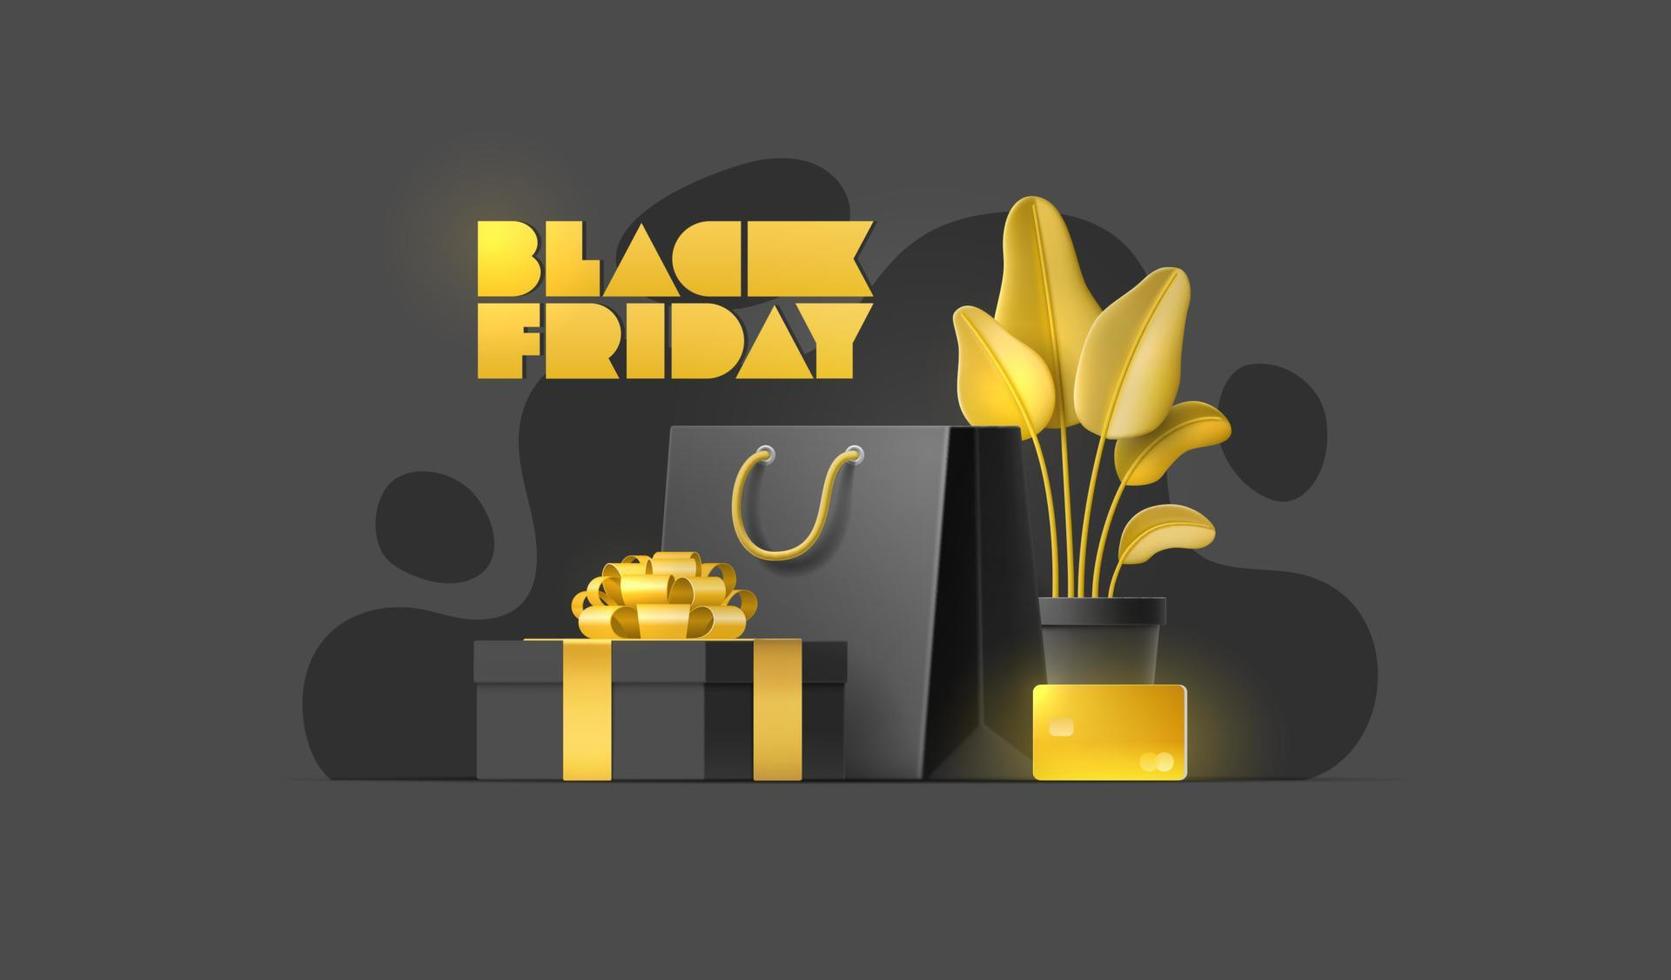 BLACK FRIDAY sale banner with shopping bag, plant, gold card, gift box on isolated background. Group of 2D objects for website, mobile app, social media, advertising, promotion, flyer, discount store. vector